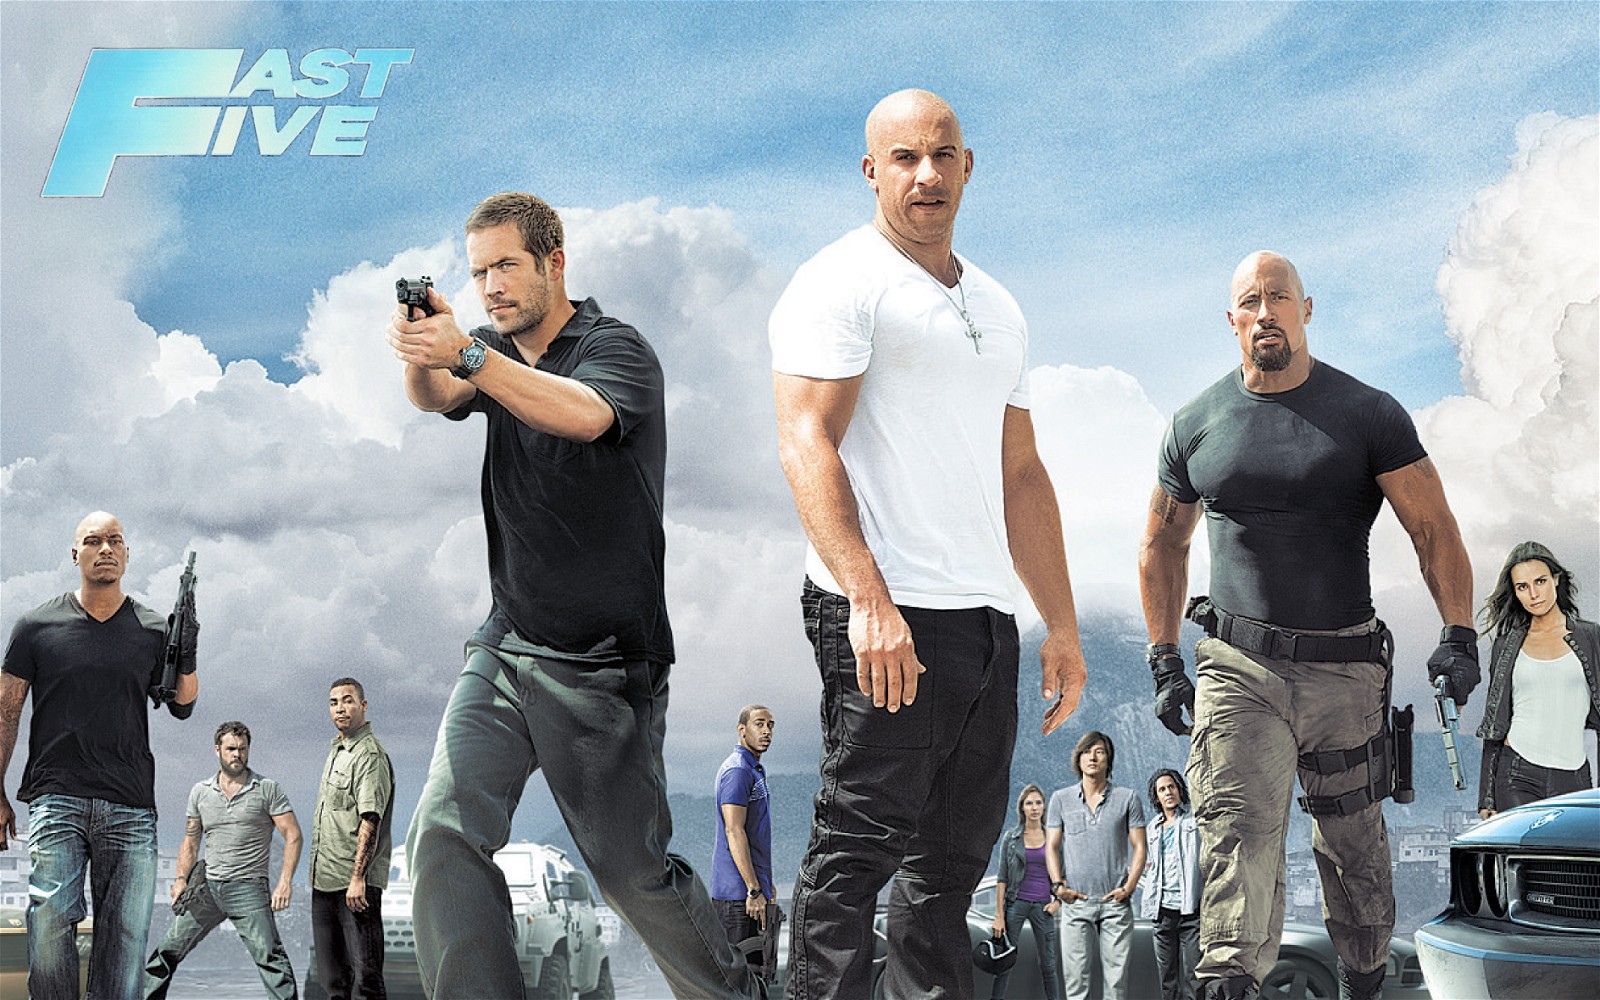 Dwayne Johnson starrer Fast Five had the greatest stunt sequence of the franchise